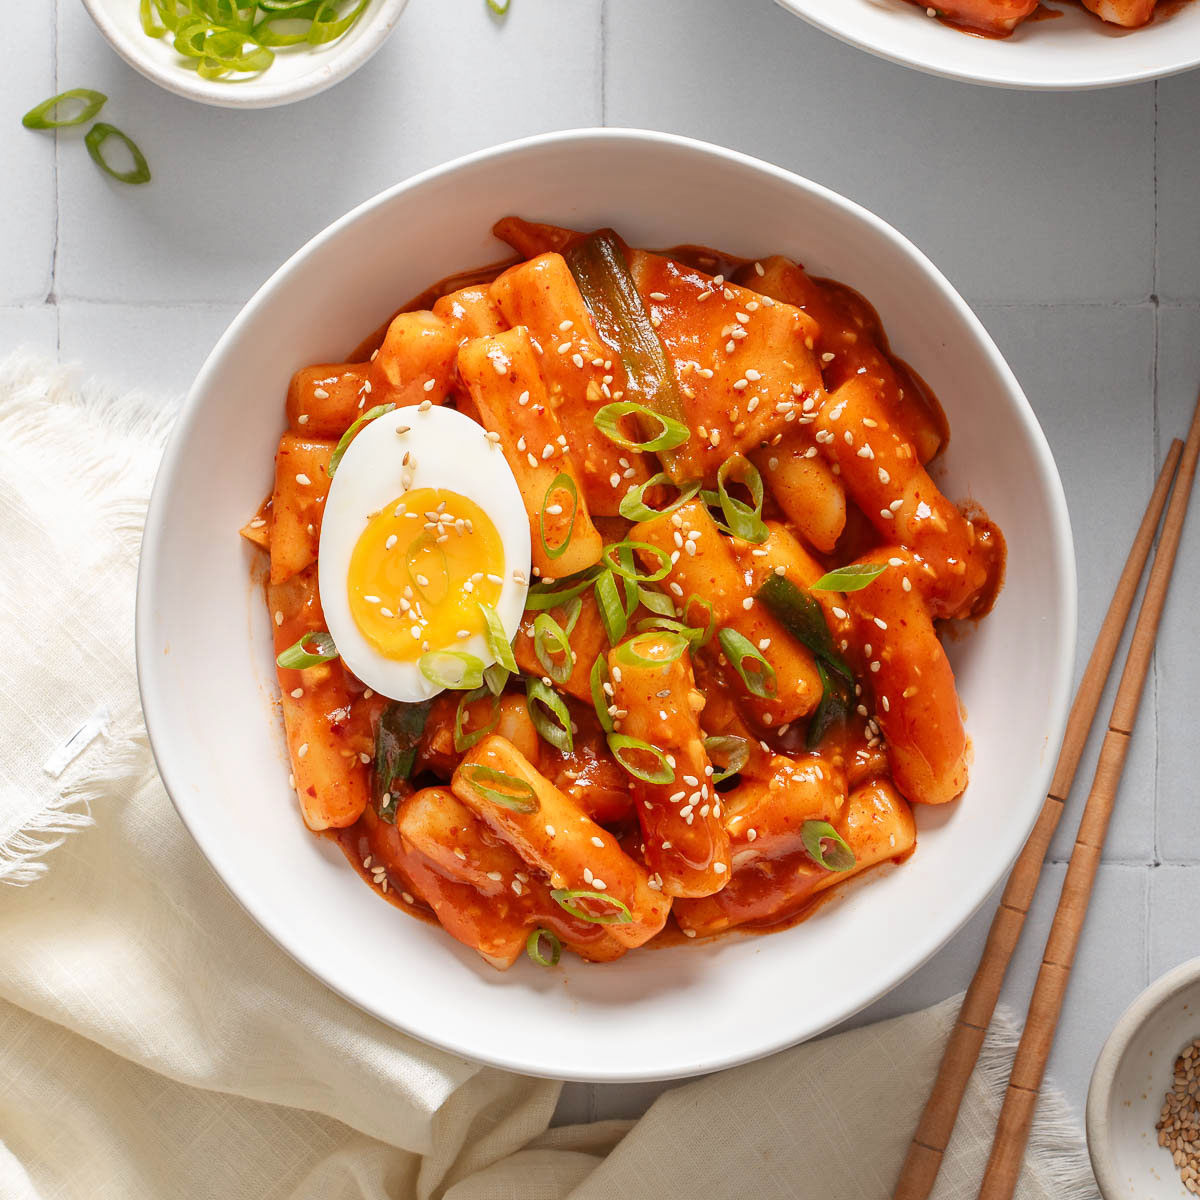 Looking down at a bowl of tteokbokki garnished with sesame seeds and an egg.